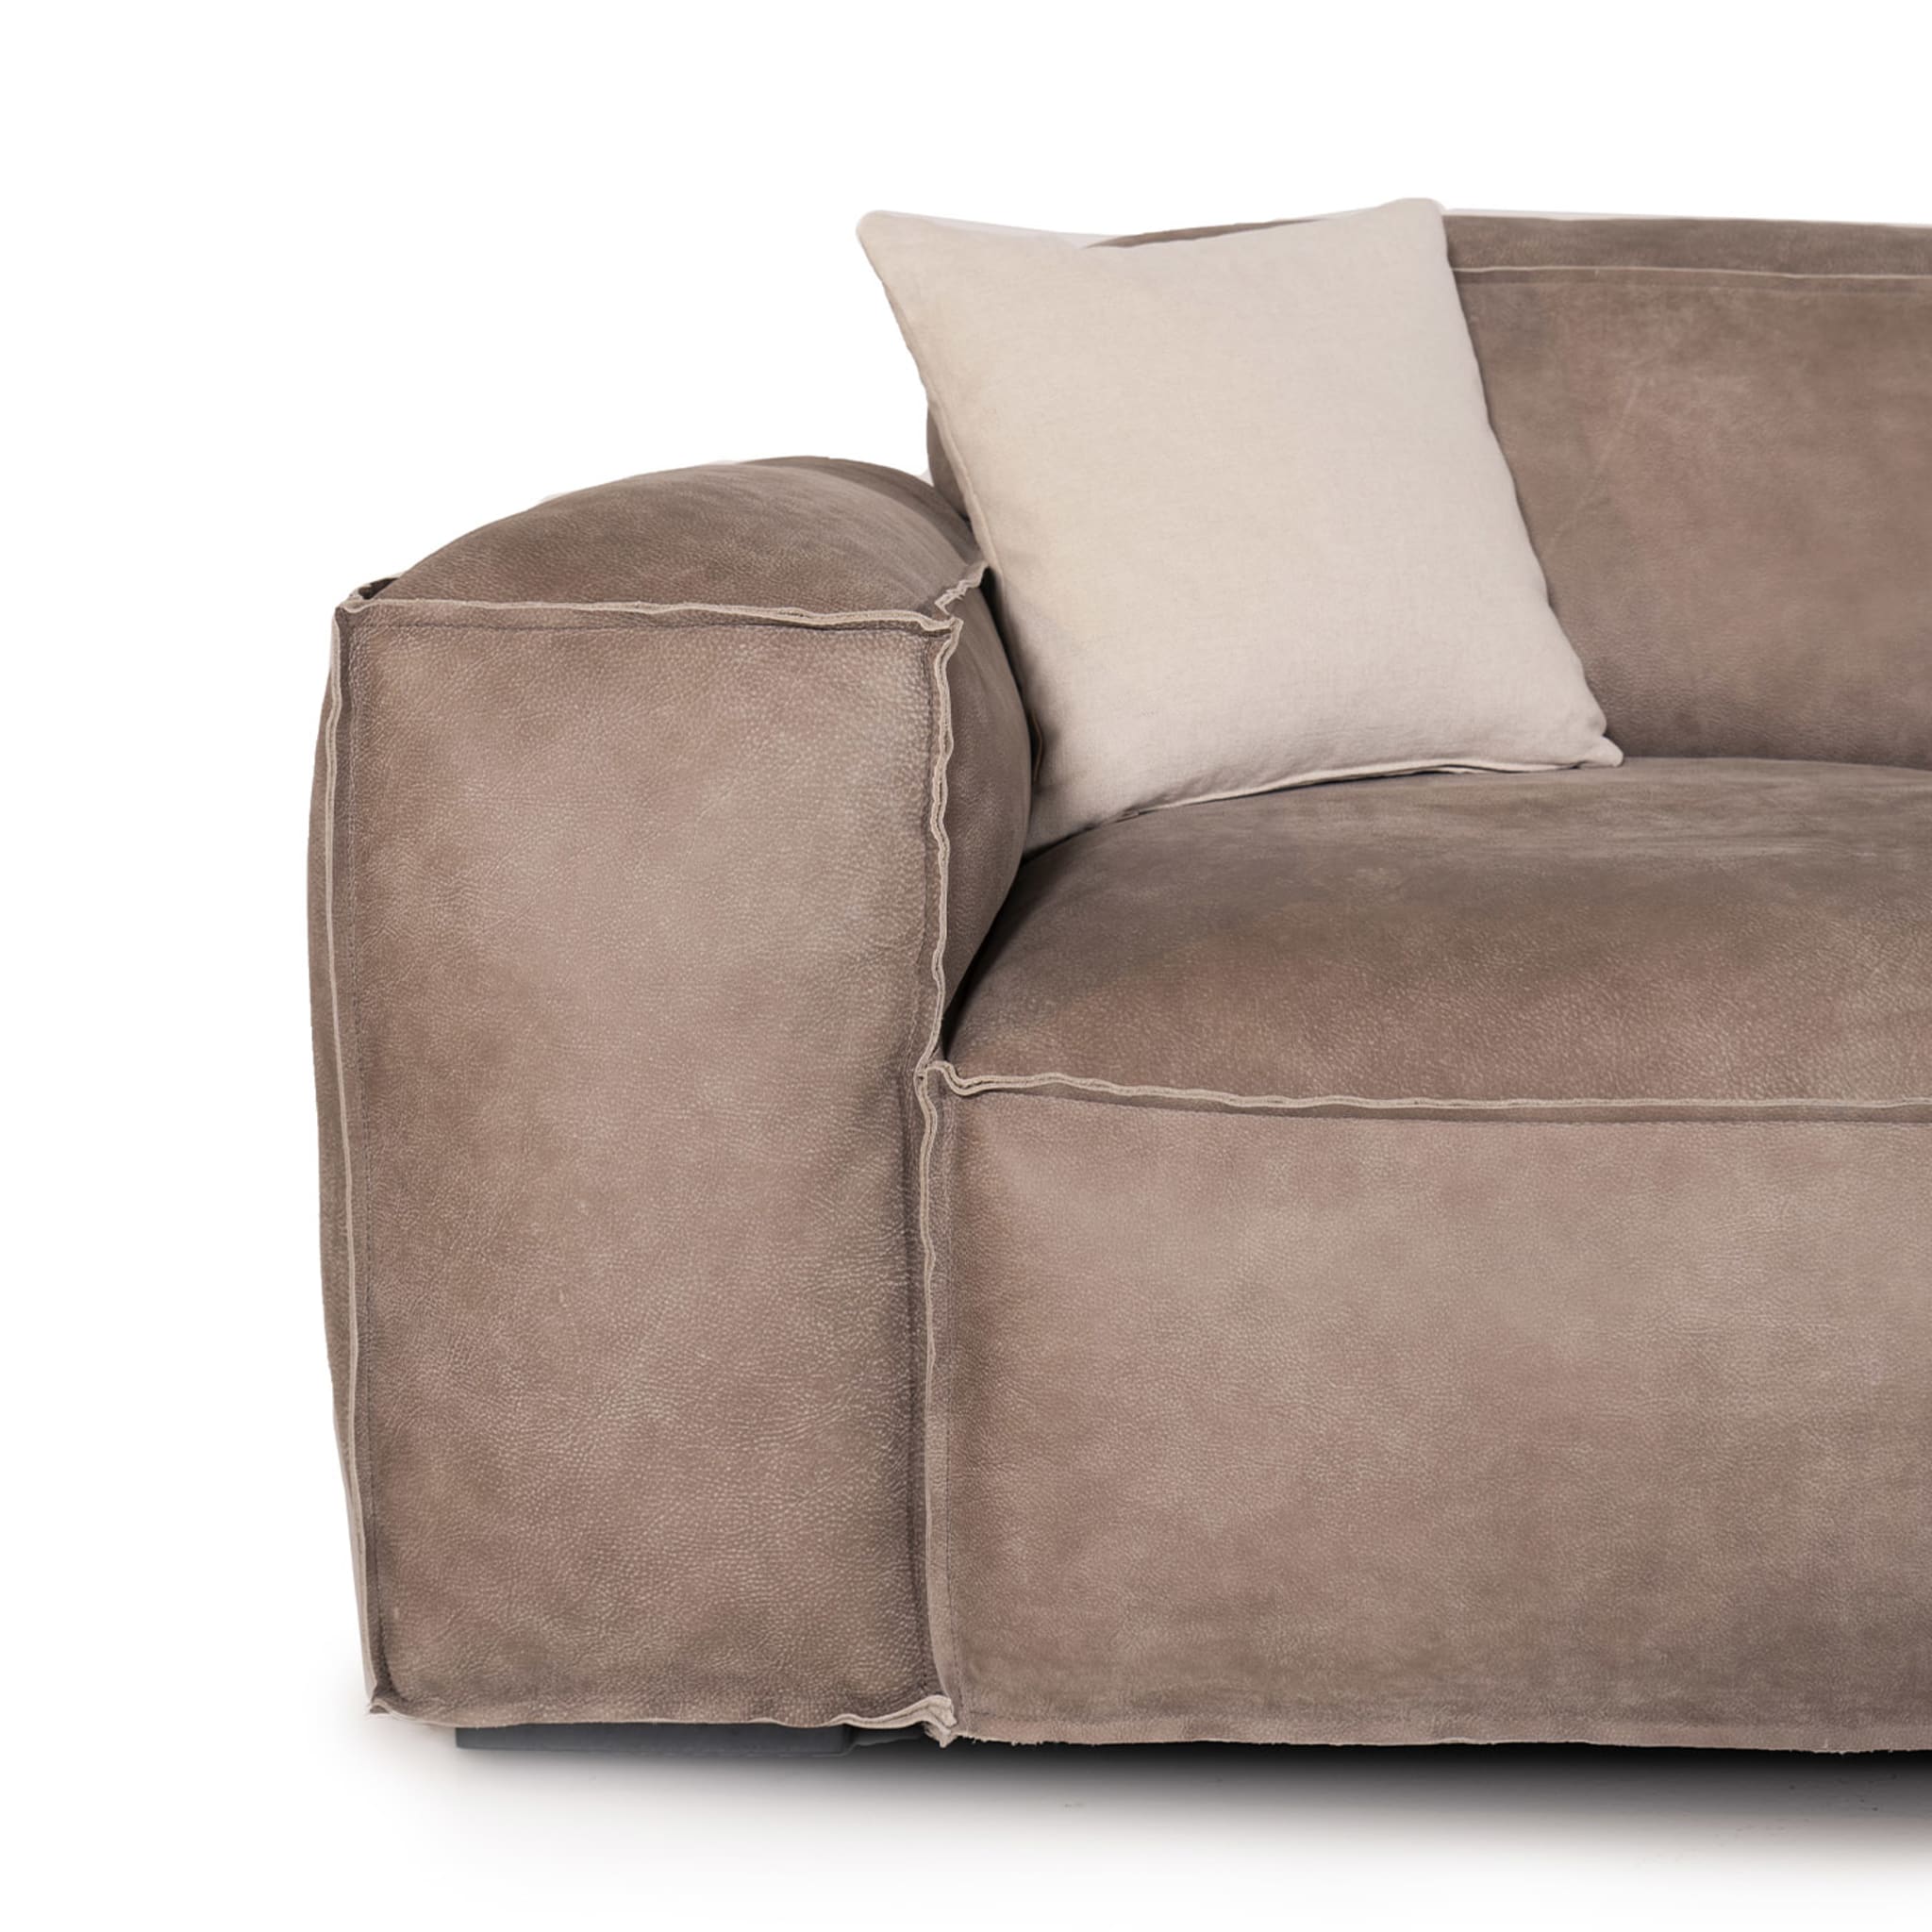 Placido 2 Seater Sofa in Gray Leather  - Alternative view 5